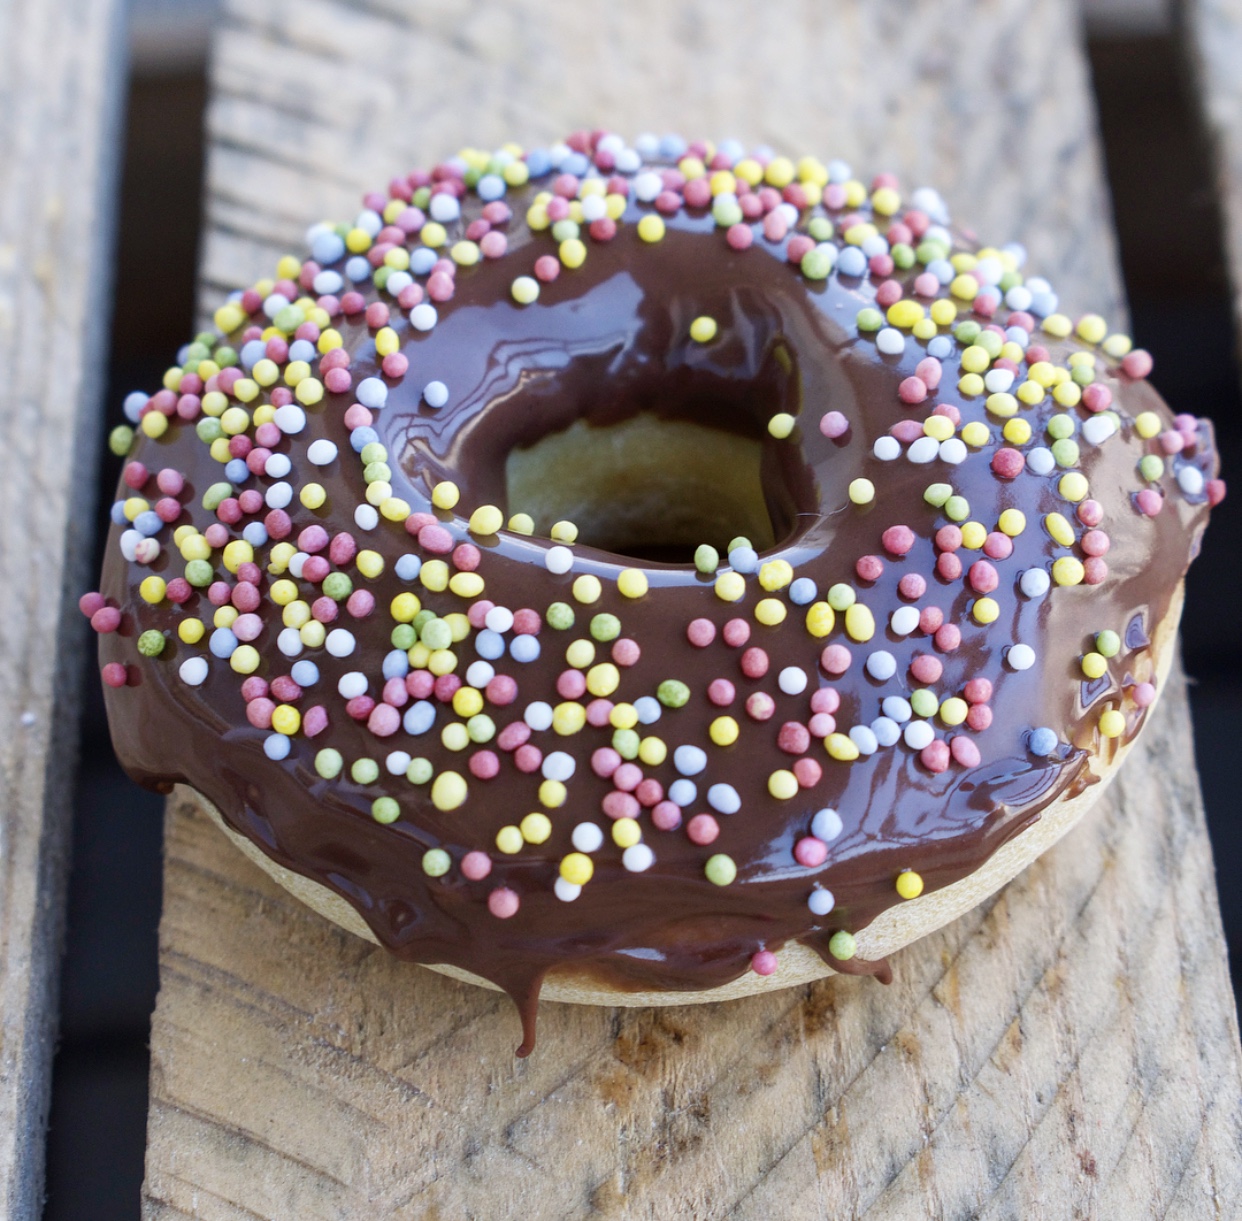 Donuts healthy